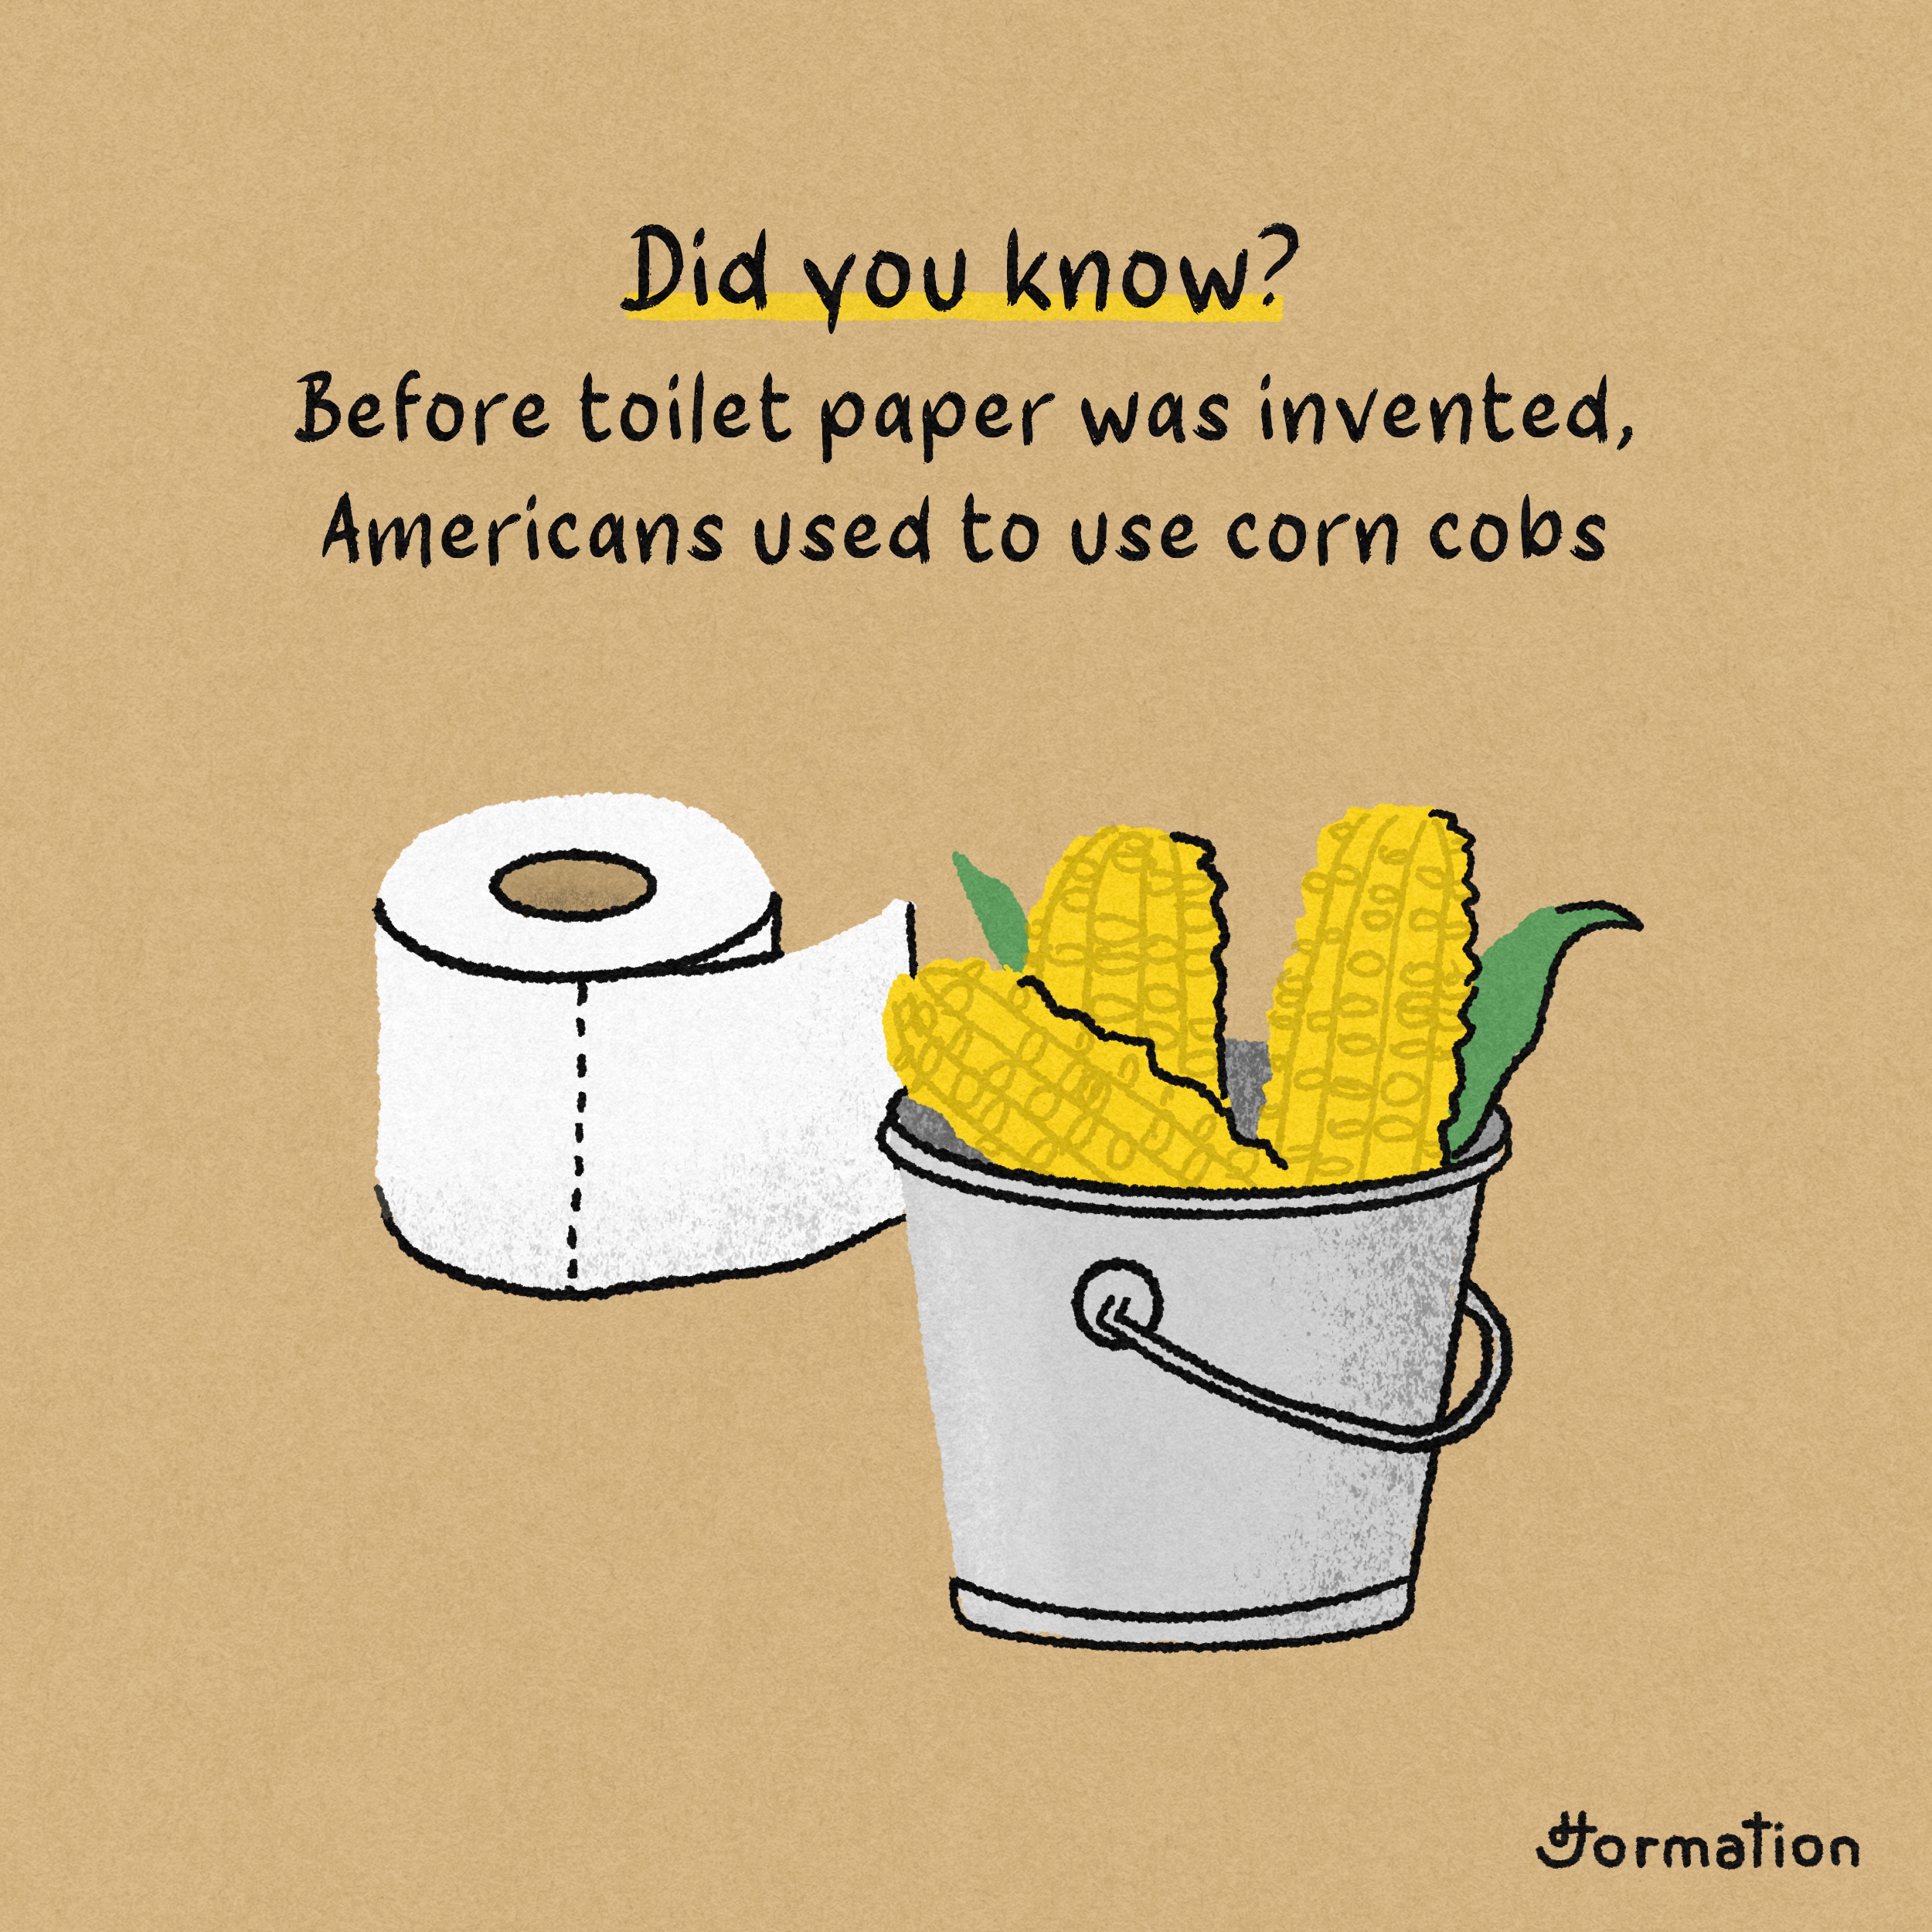 What did people do before toilet paper?